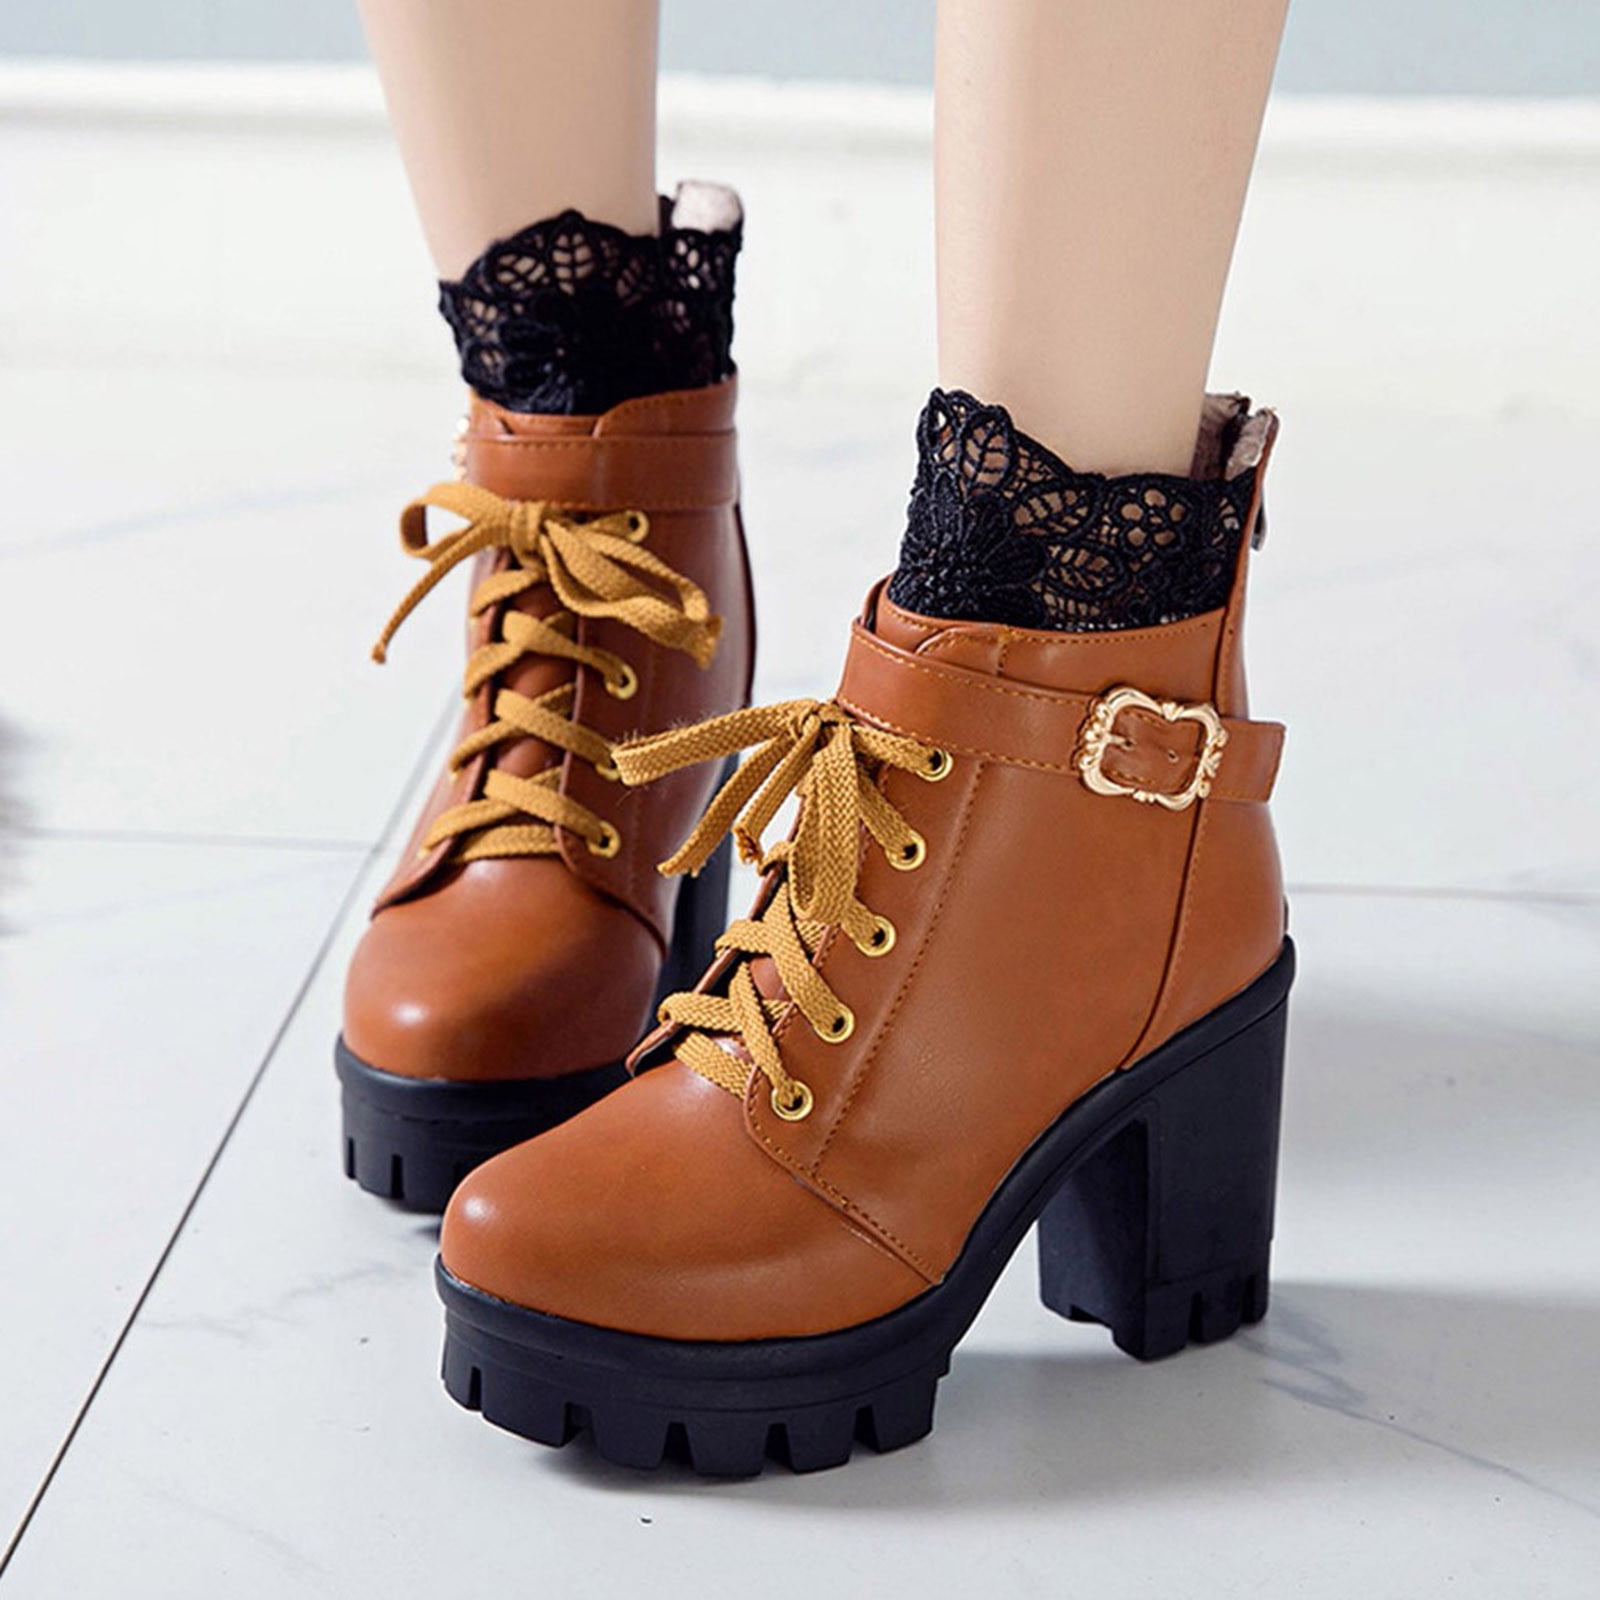 Buy Saint G Solid Black Leather Lace Up High Ankle Boots Online